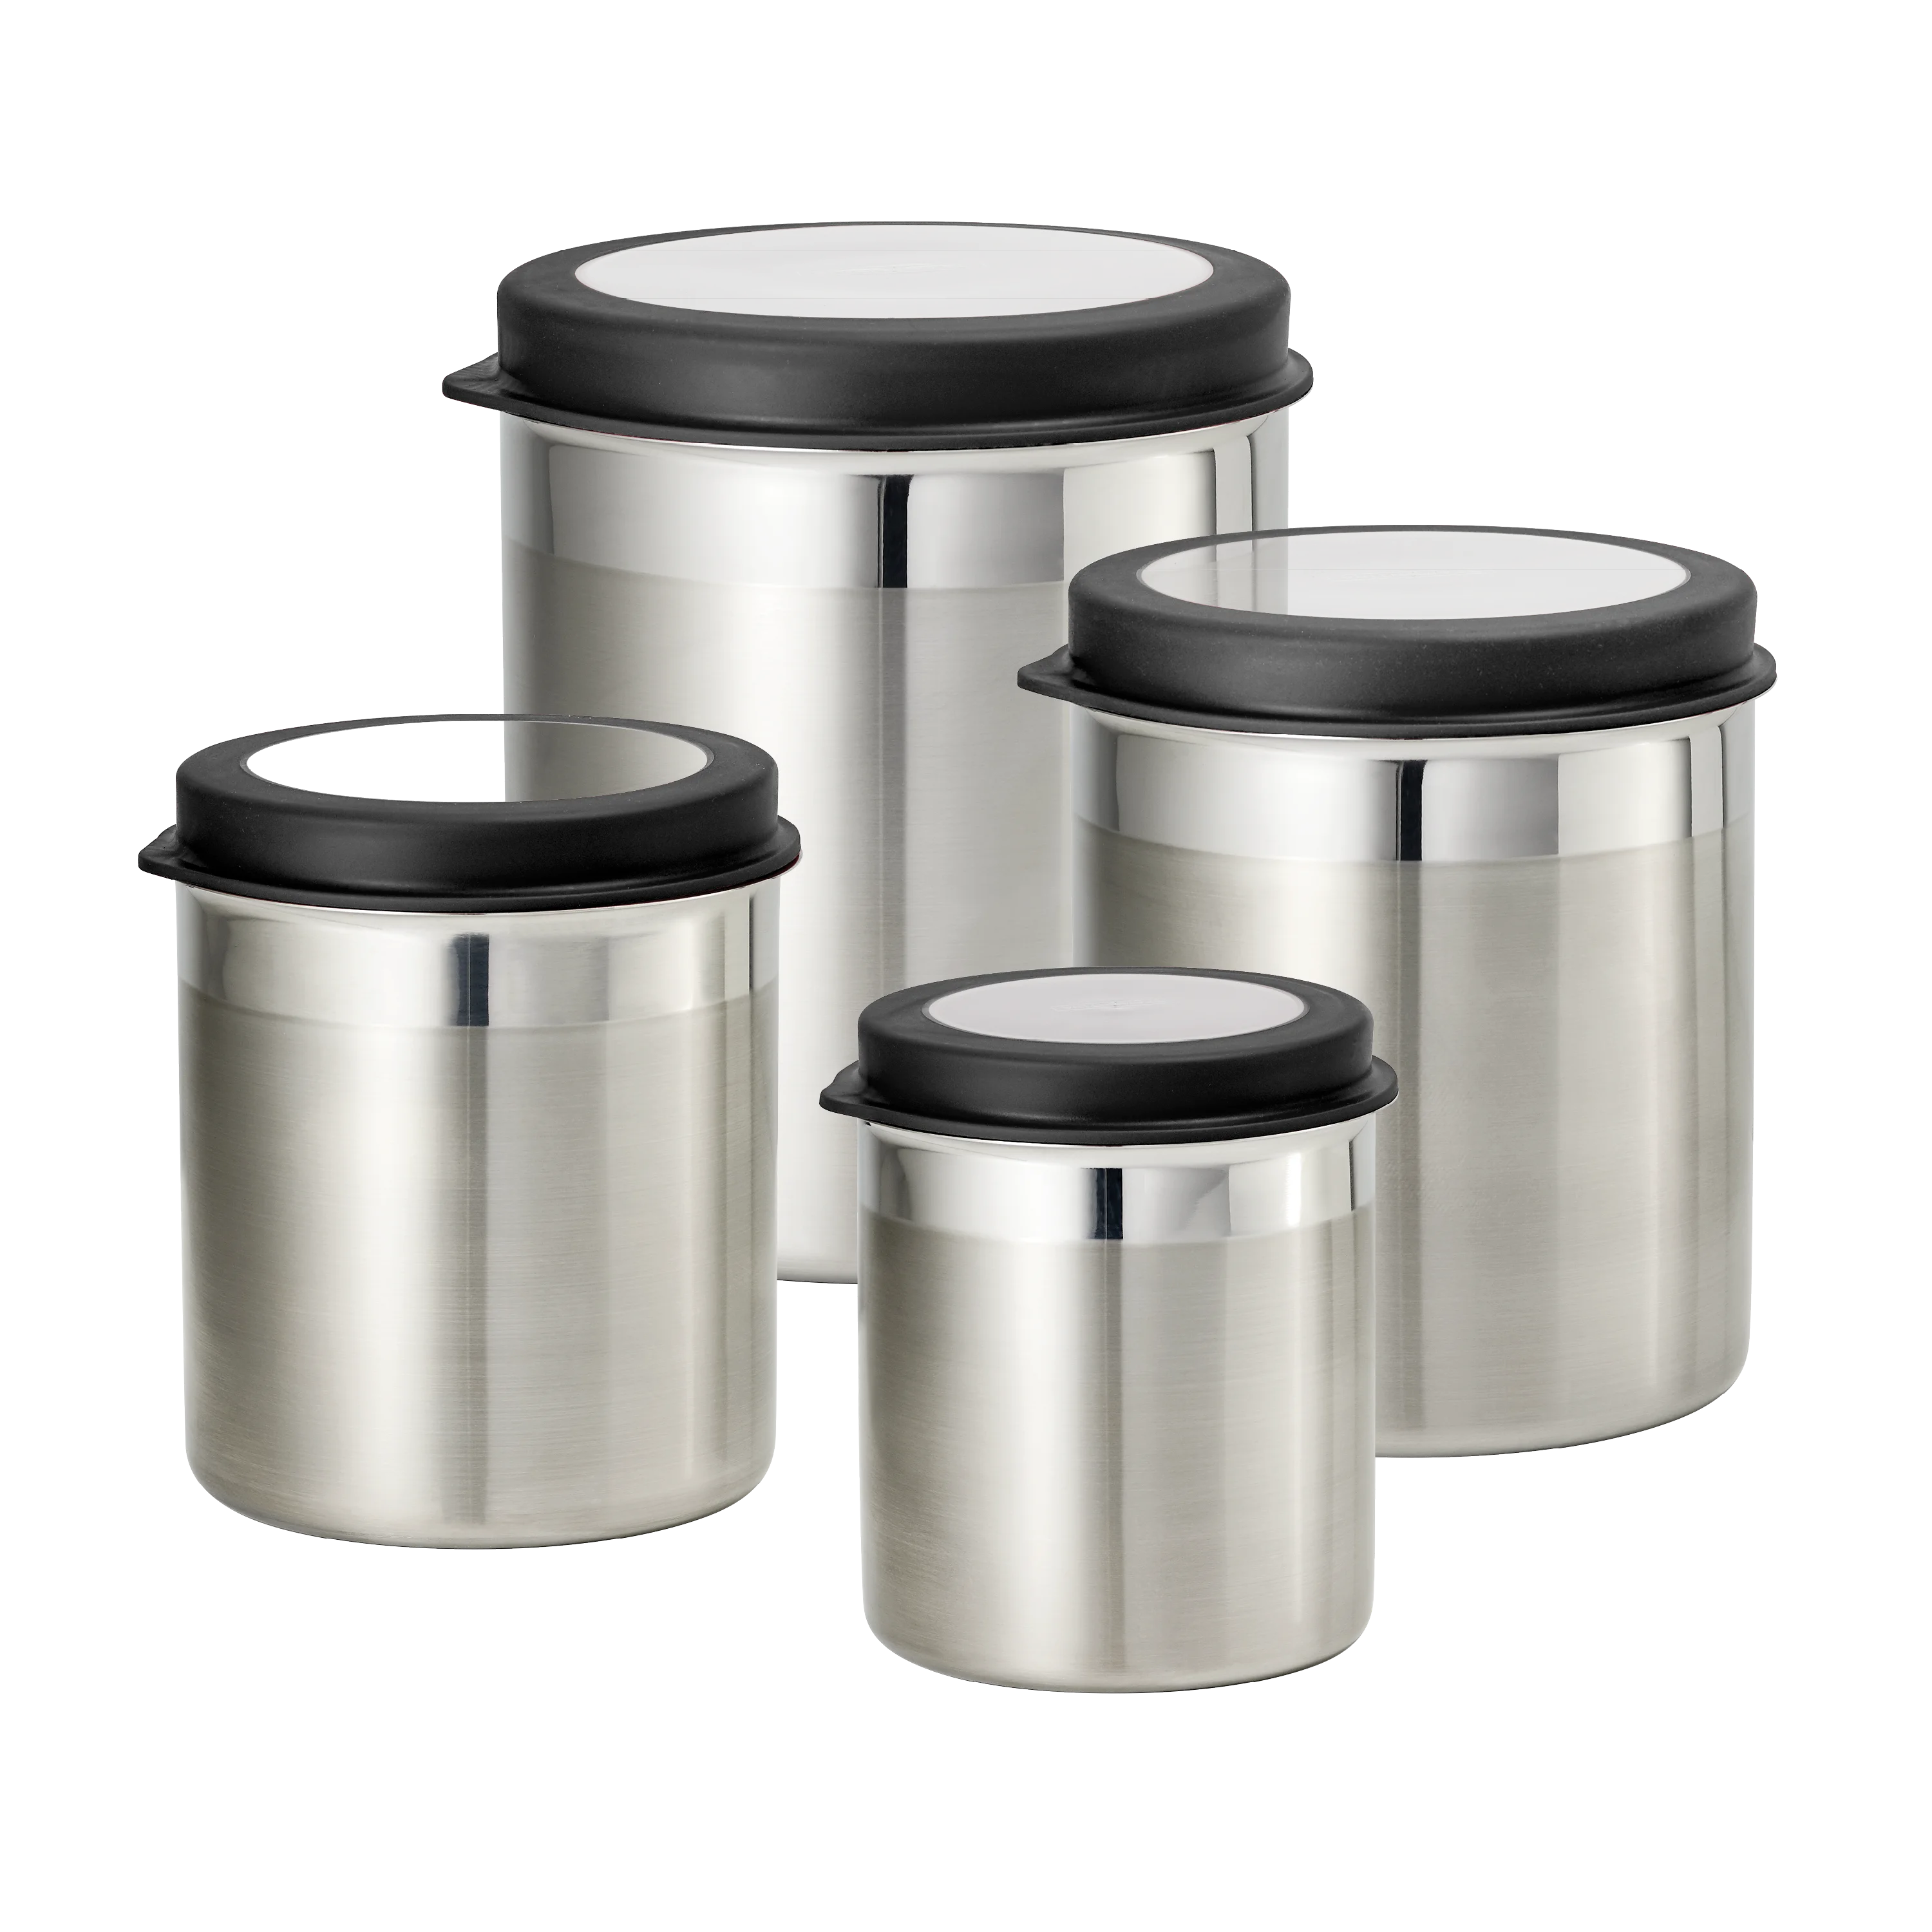 6 Pc Stainless Steel Covered Square Container Set - Frosted Lids -  Tramontina US